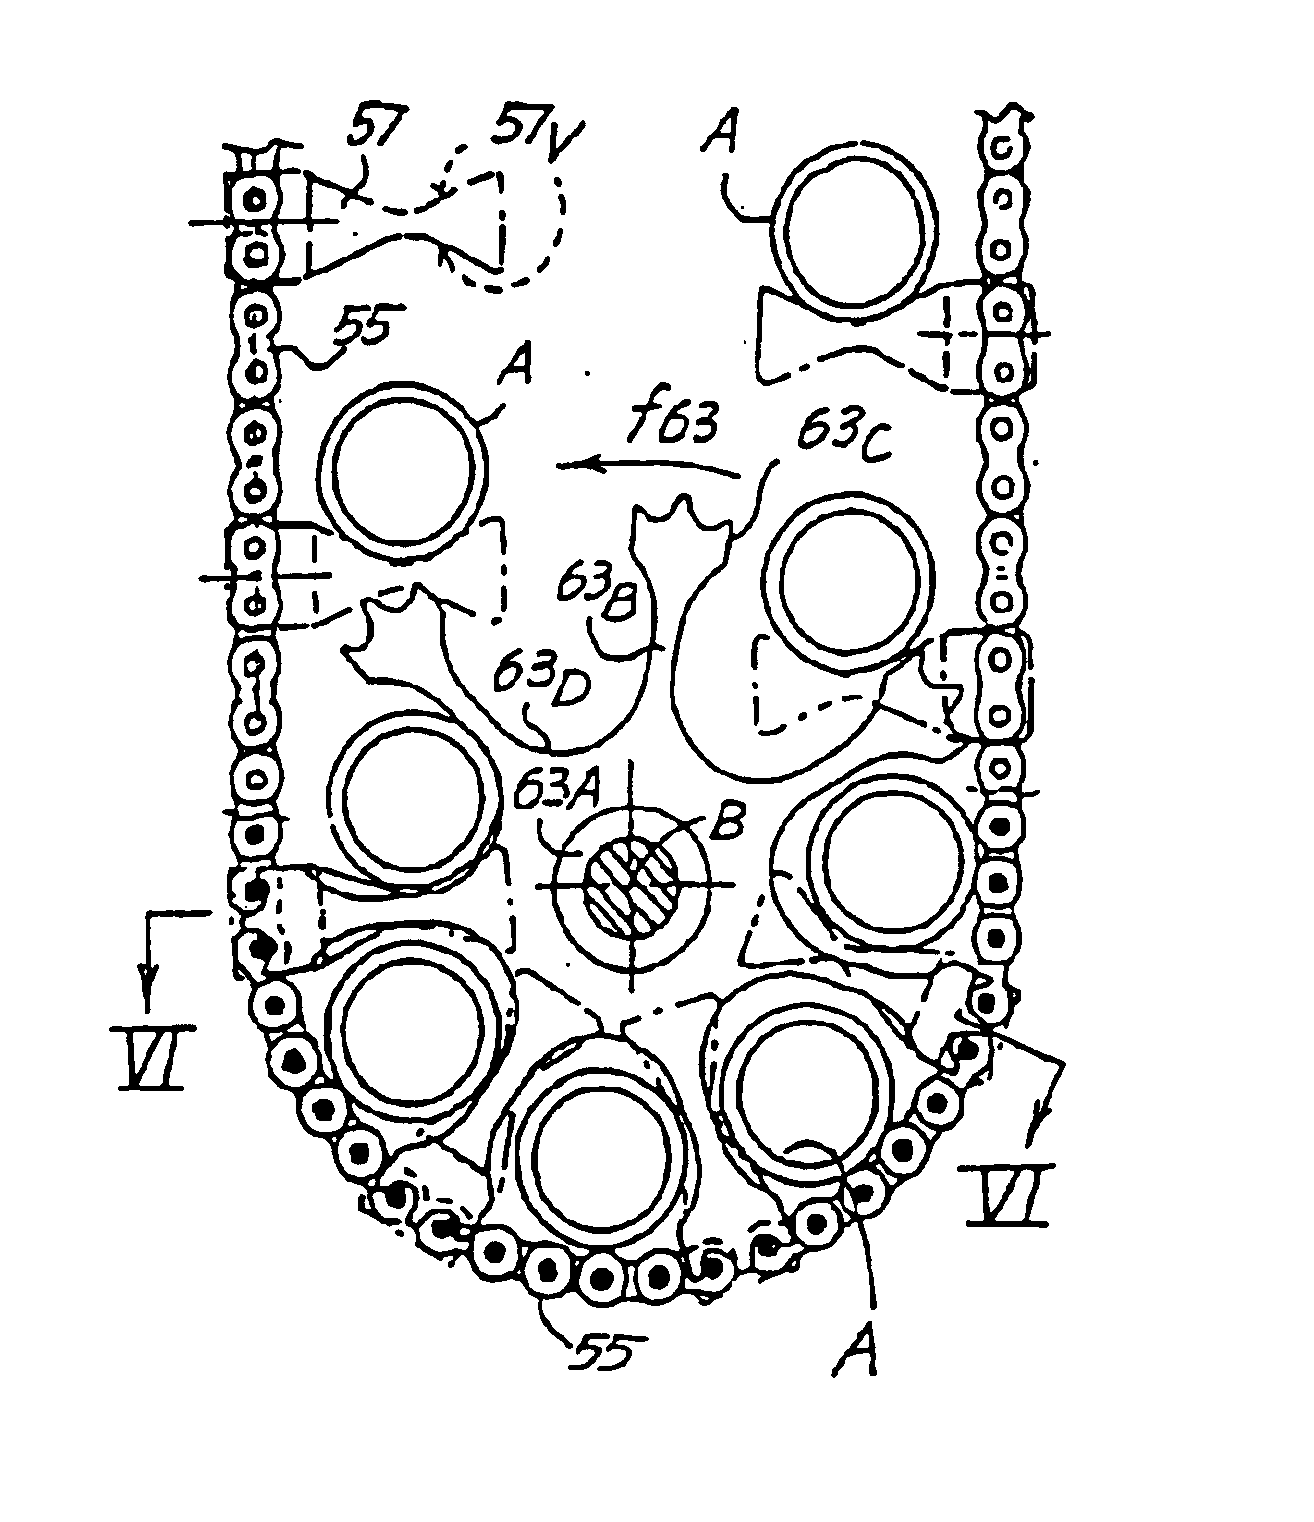 Accumulator for elongated products, such as tubes and the like